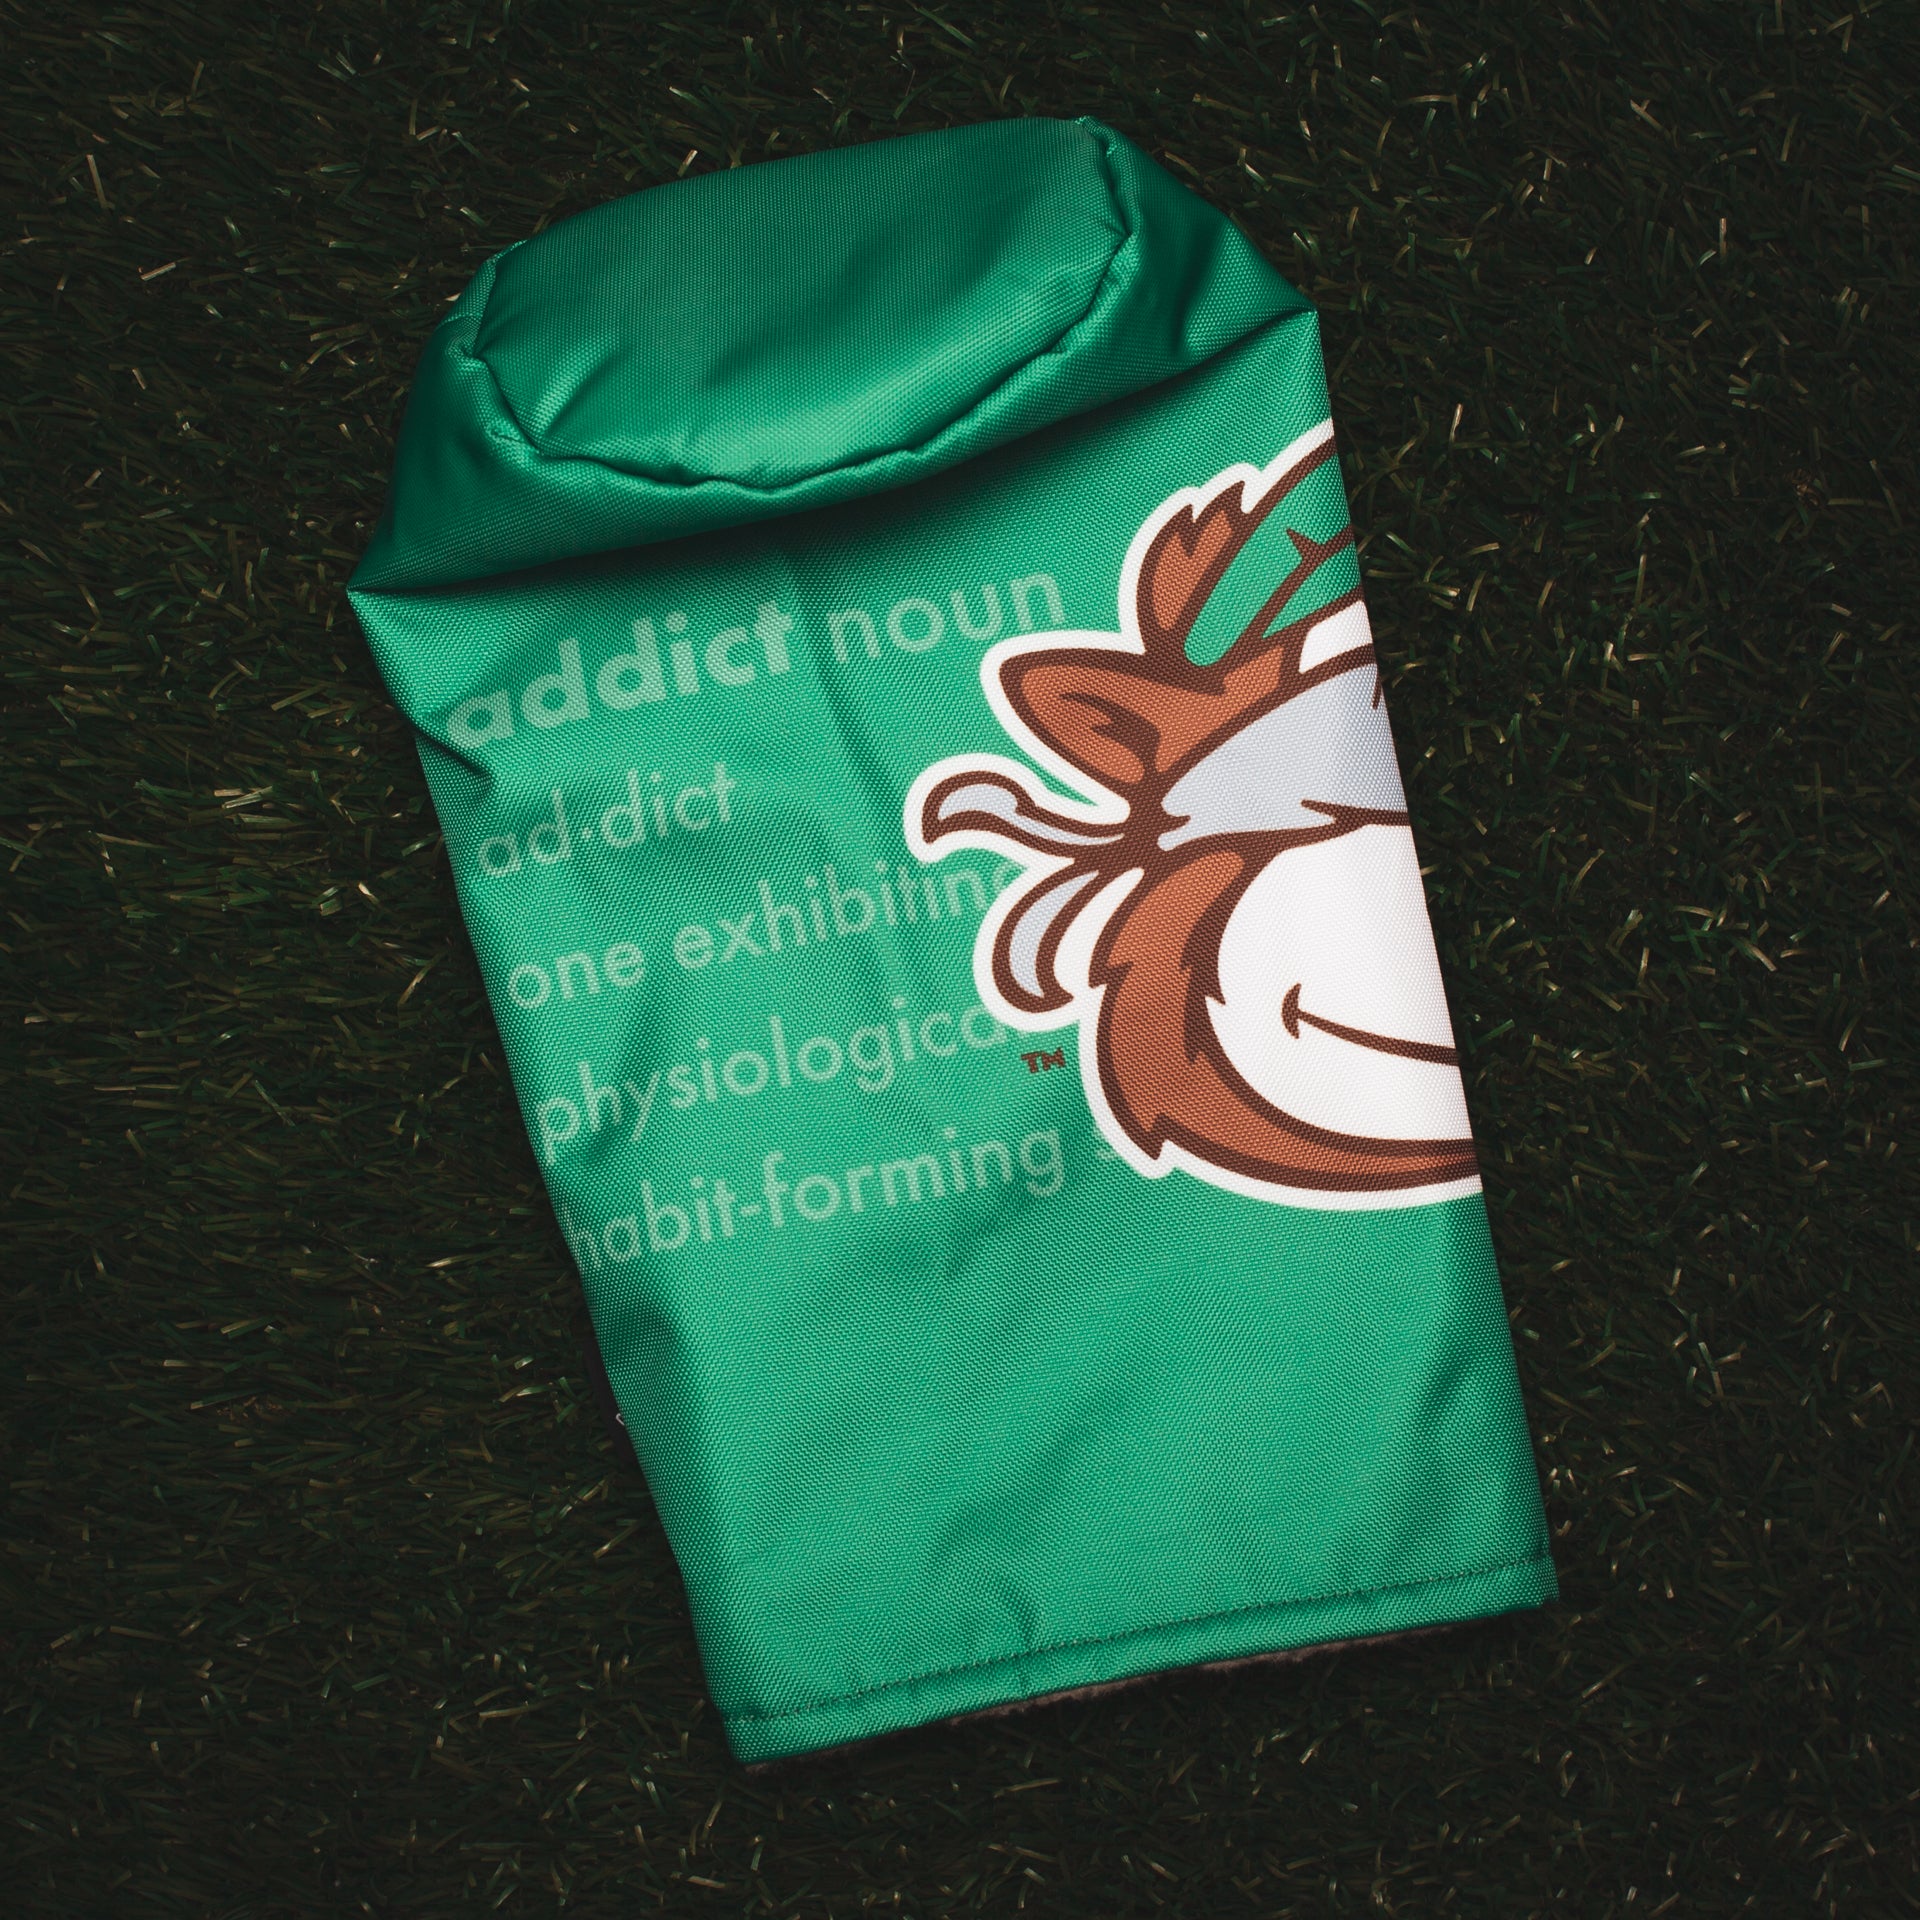 Custom golf headcovers for Tour Junkies. This green driver headcover features their mascot Golby overlaying a ghosted "addict" definition in the background. (3690913595471)